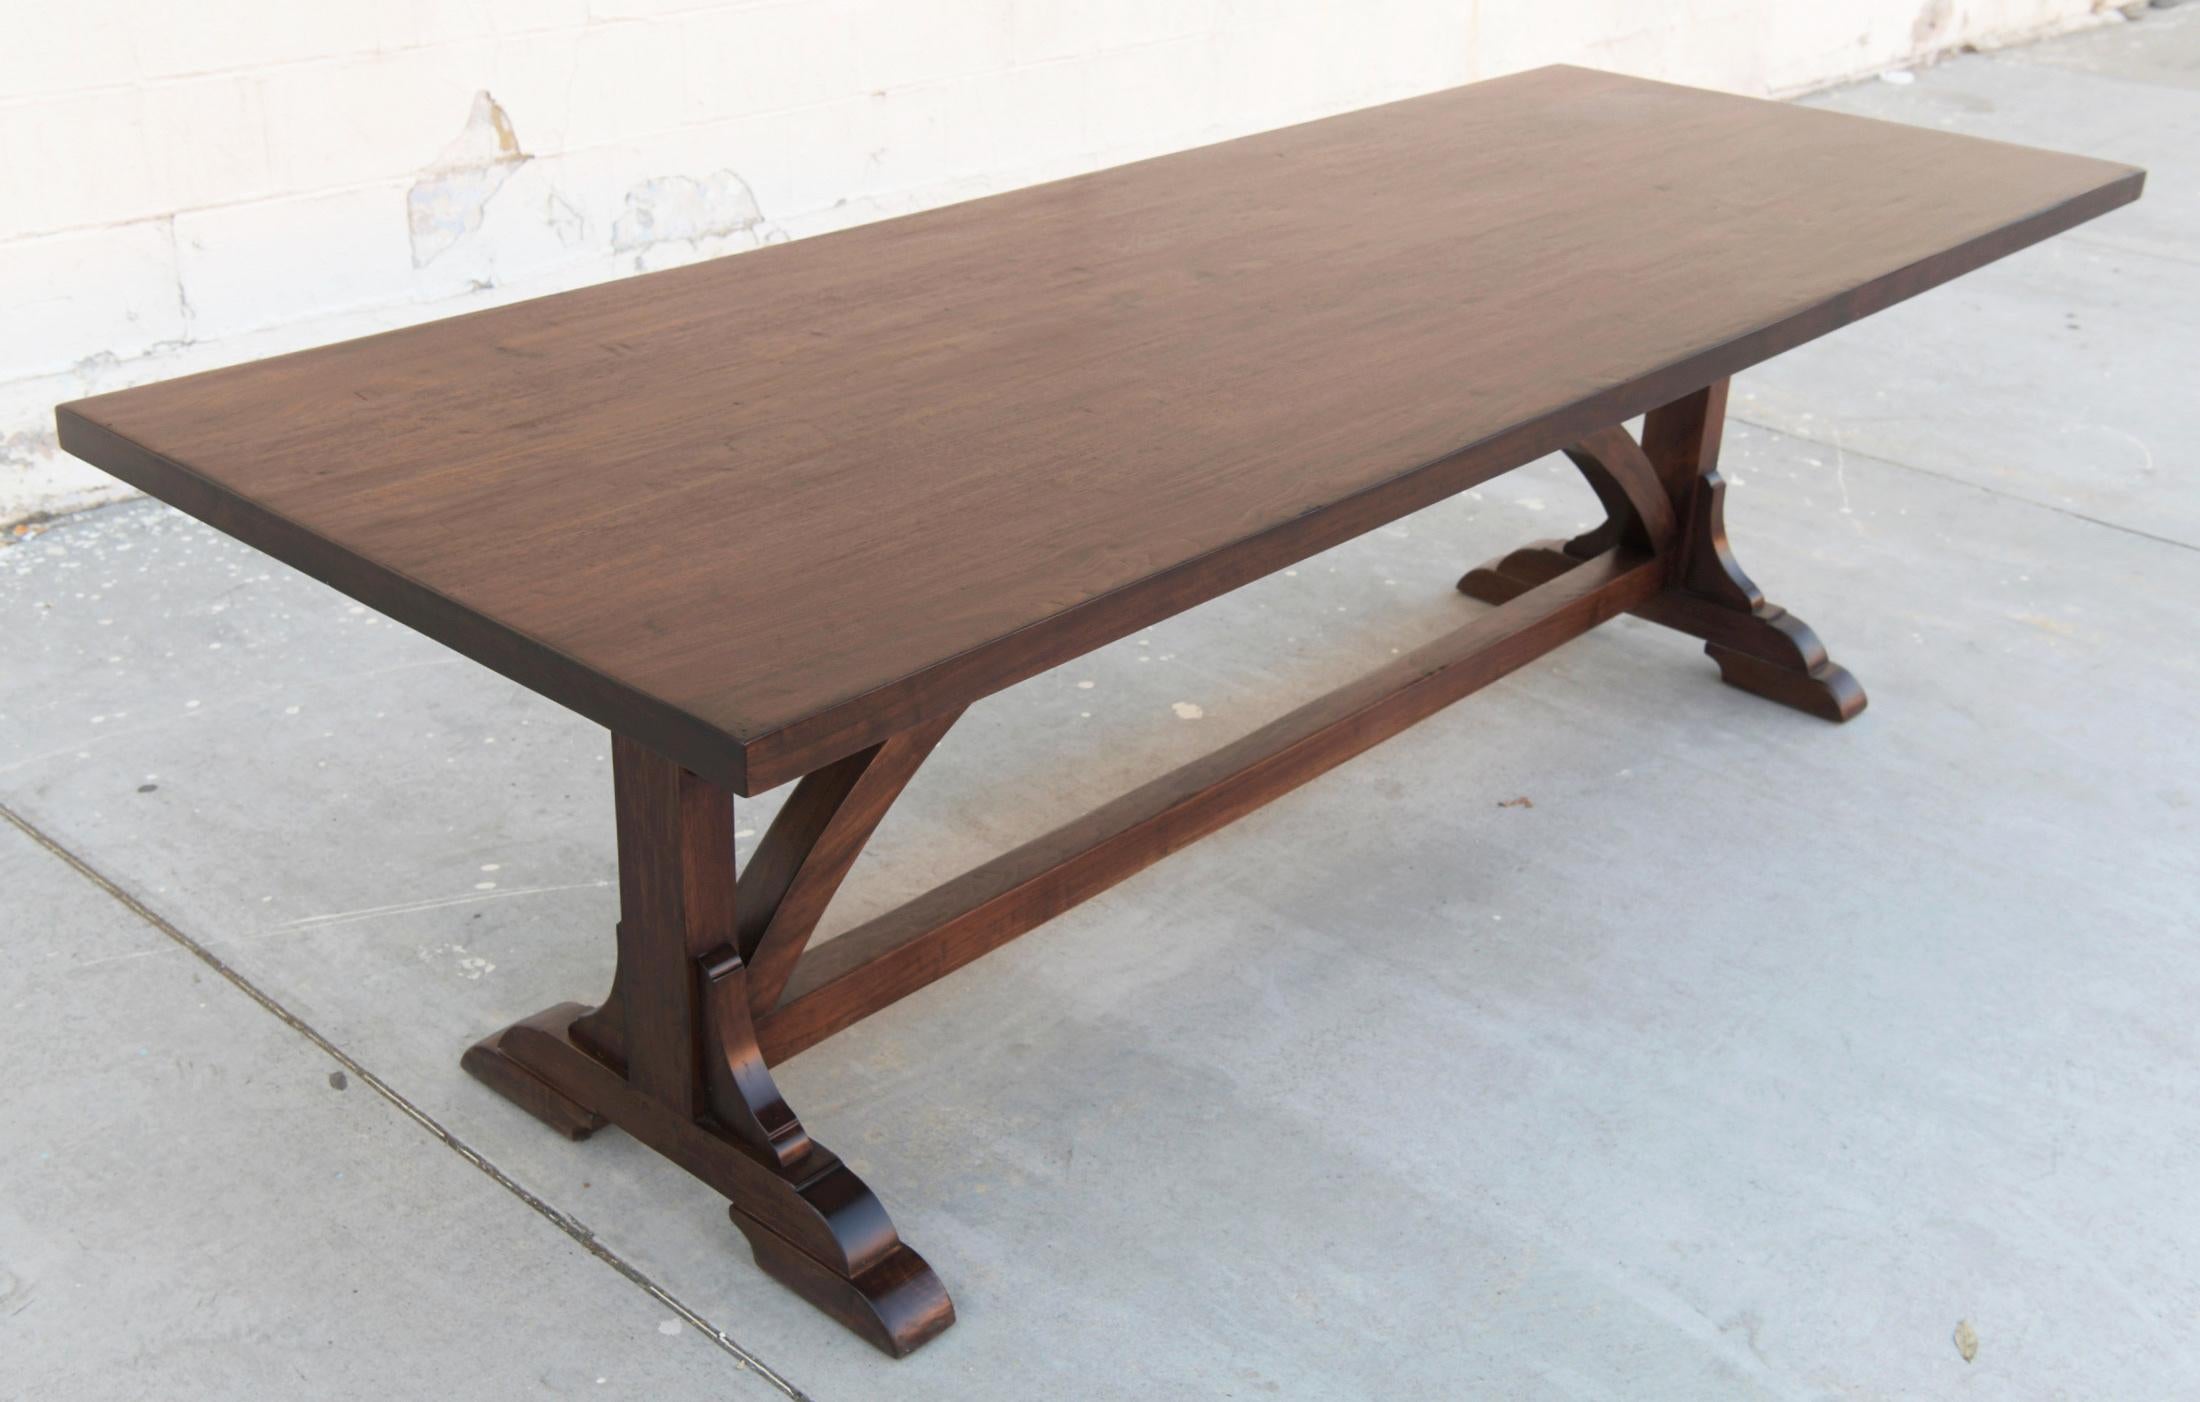 made-to-order dining furniture